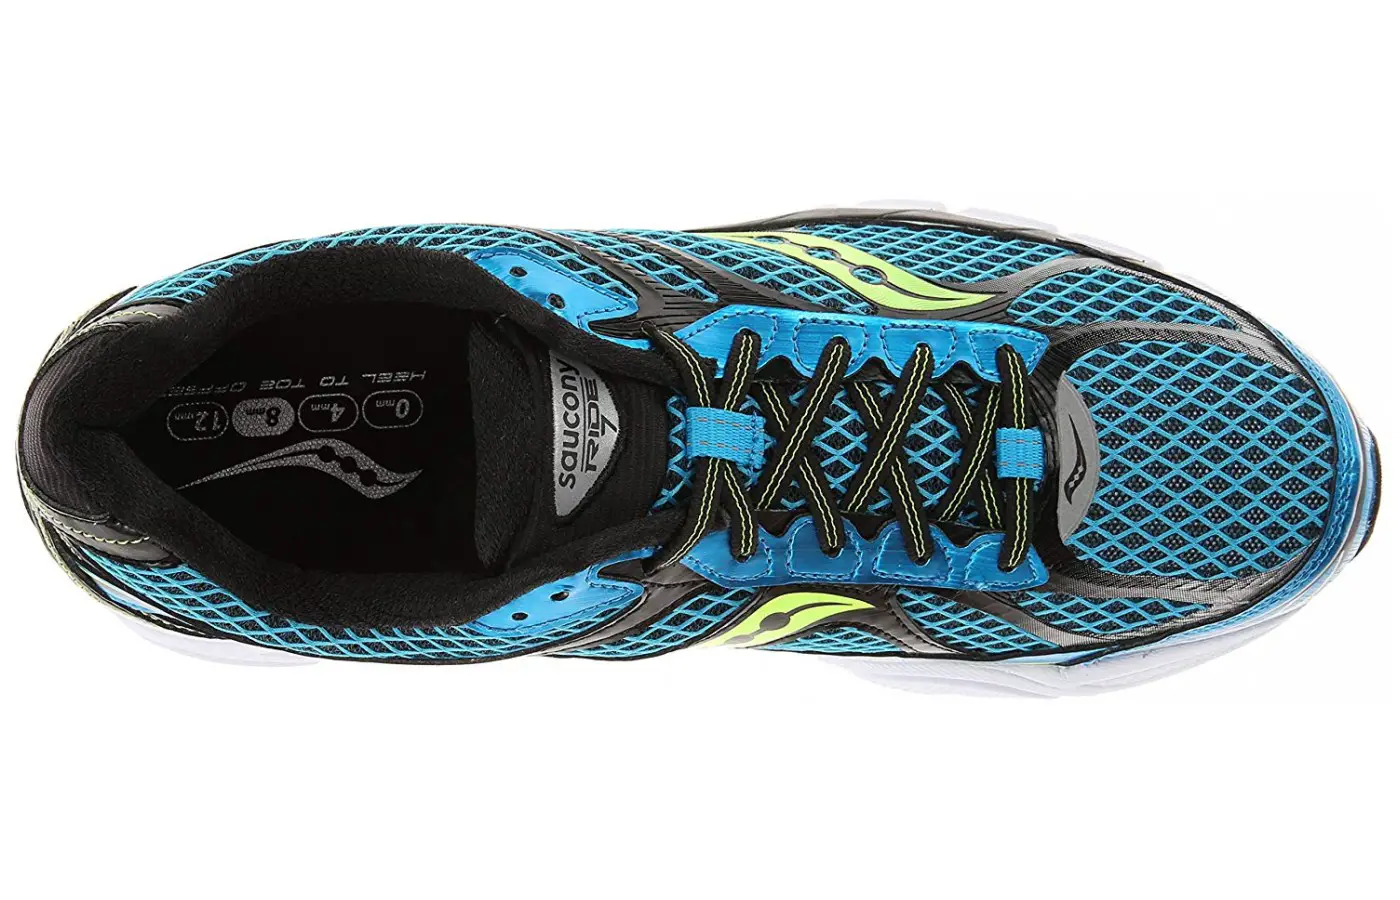 The the Ride 7 is made with an open mesh upper for breathability and comfort